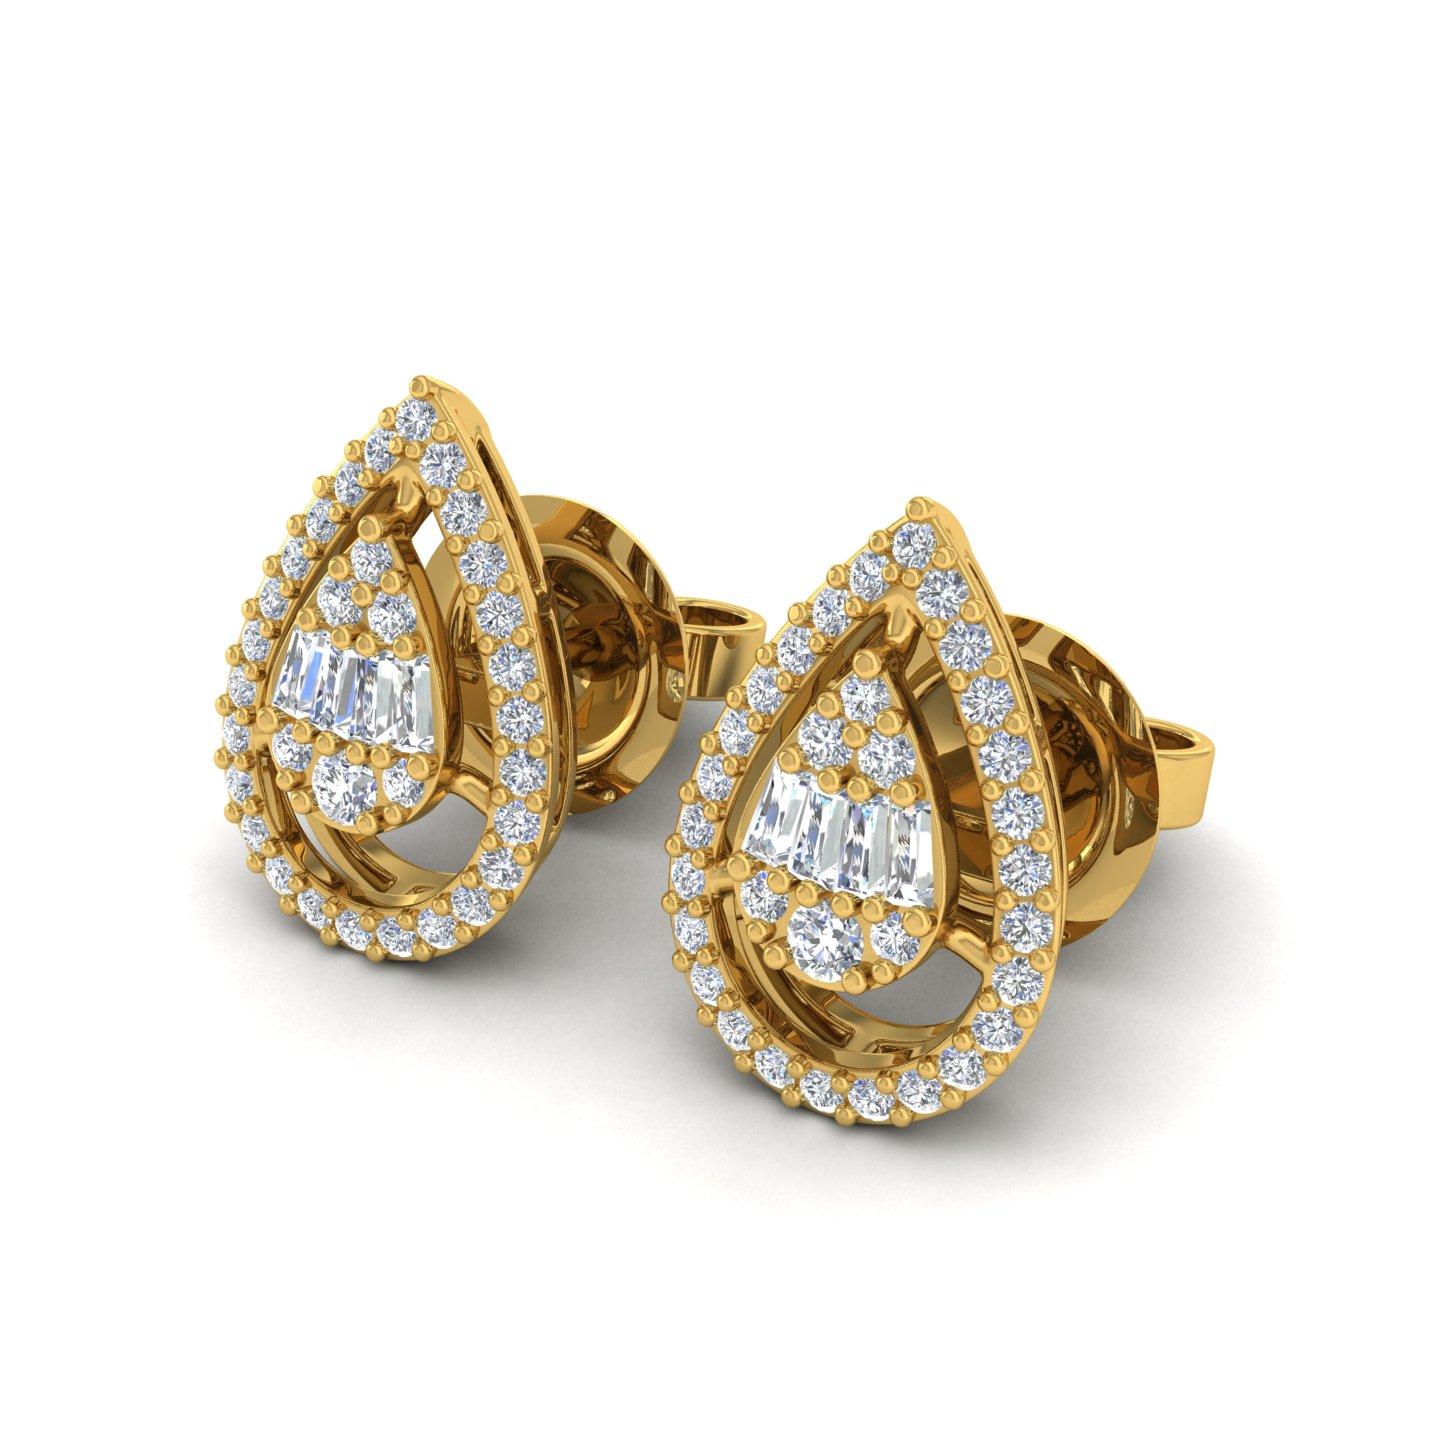 Item Code :- CNF-21096
Gross Weight :- 2.13 gm
14k Yellow Gold Weight :- 2.03 gm
Diamond Weight :- 0.50 Carat  ( AVERAGE DIAMOND CLARITY SI1-SI2 & COLOR H-I )
Earrings Size :- 12.33x8.33 mm approx.
✦ Sizing
.....................
We can adjust most